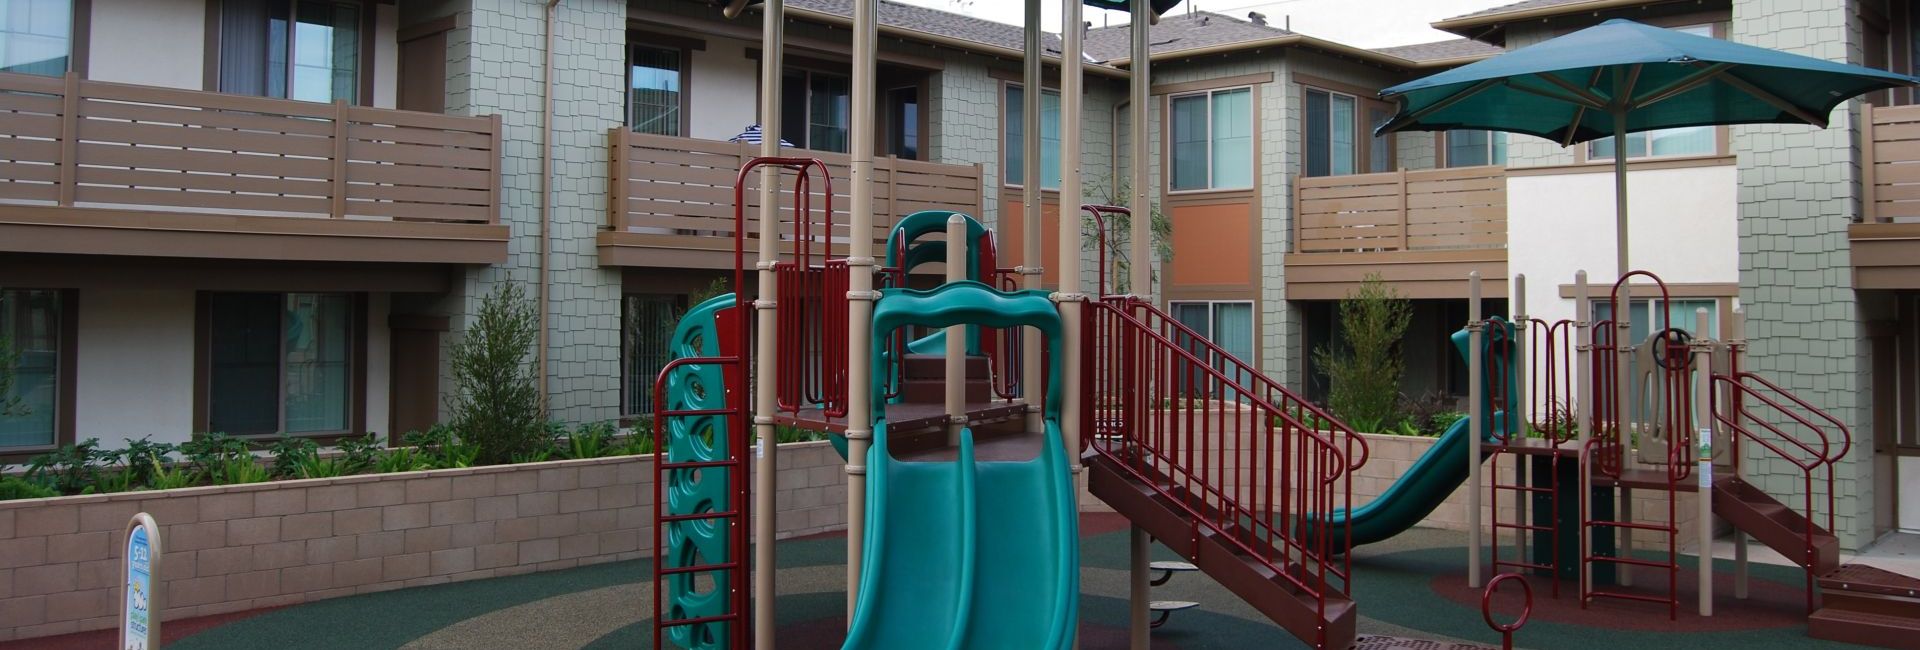 Featured image of park in middle of apartment complex with green slides and yellow railing